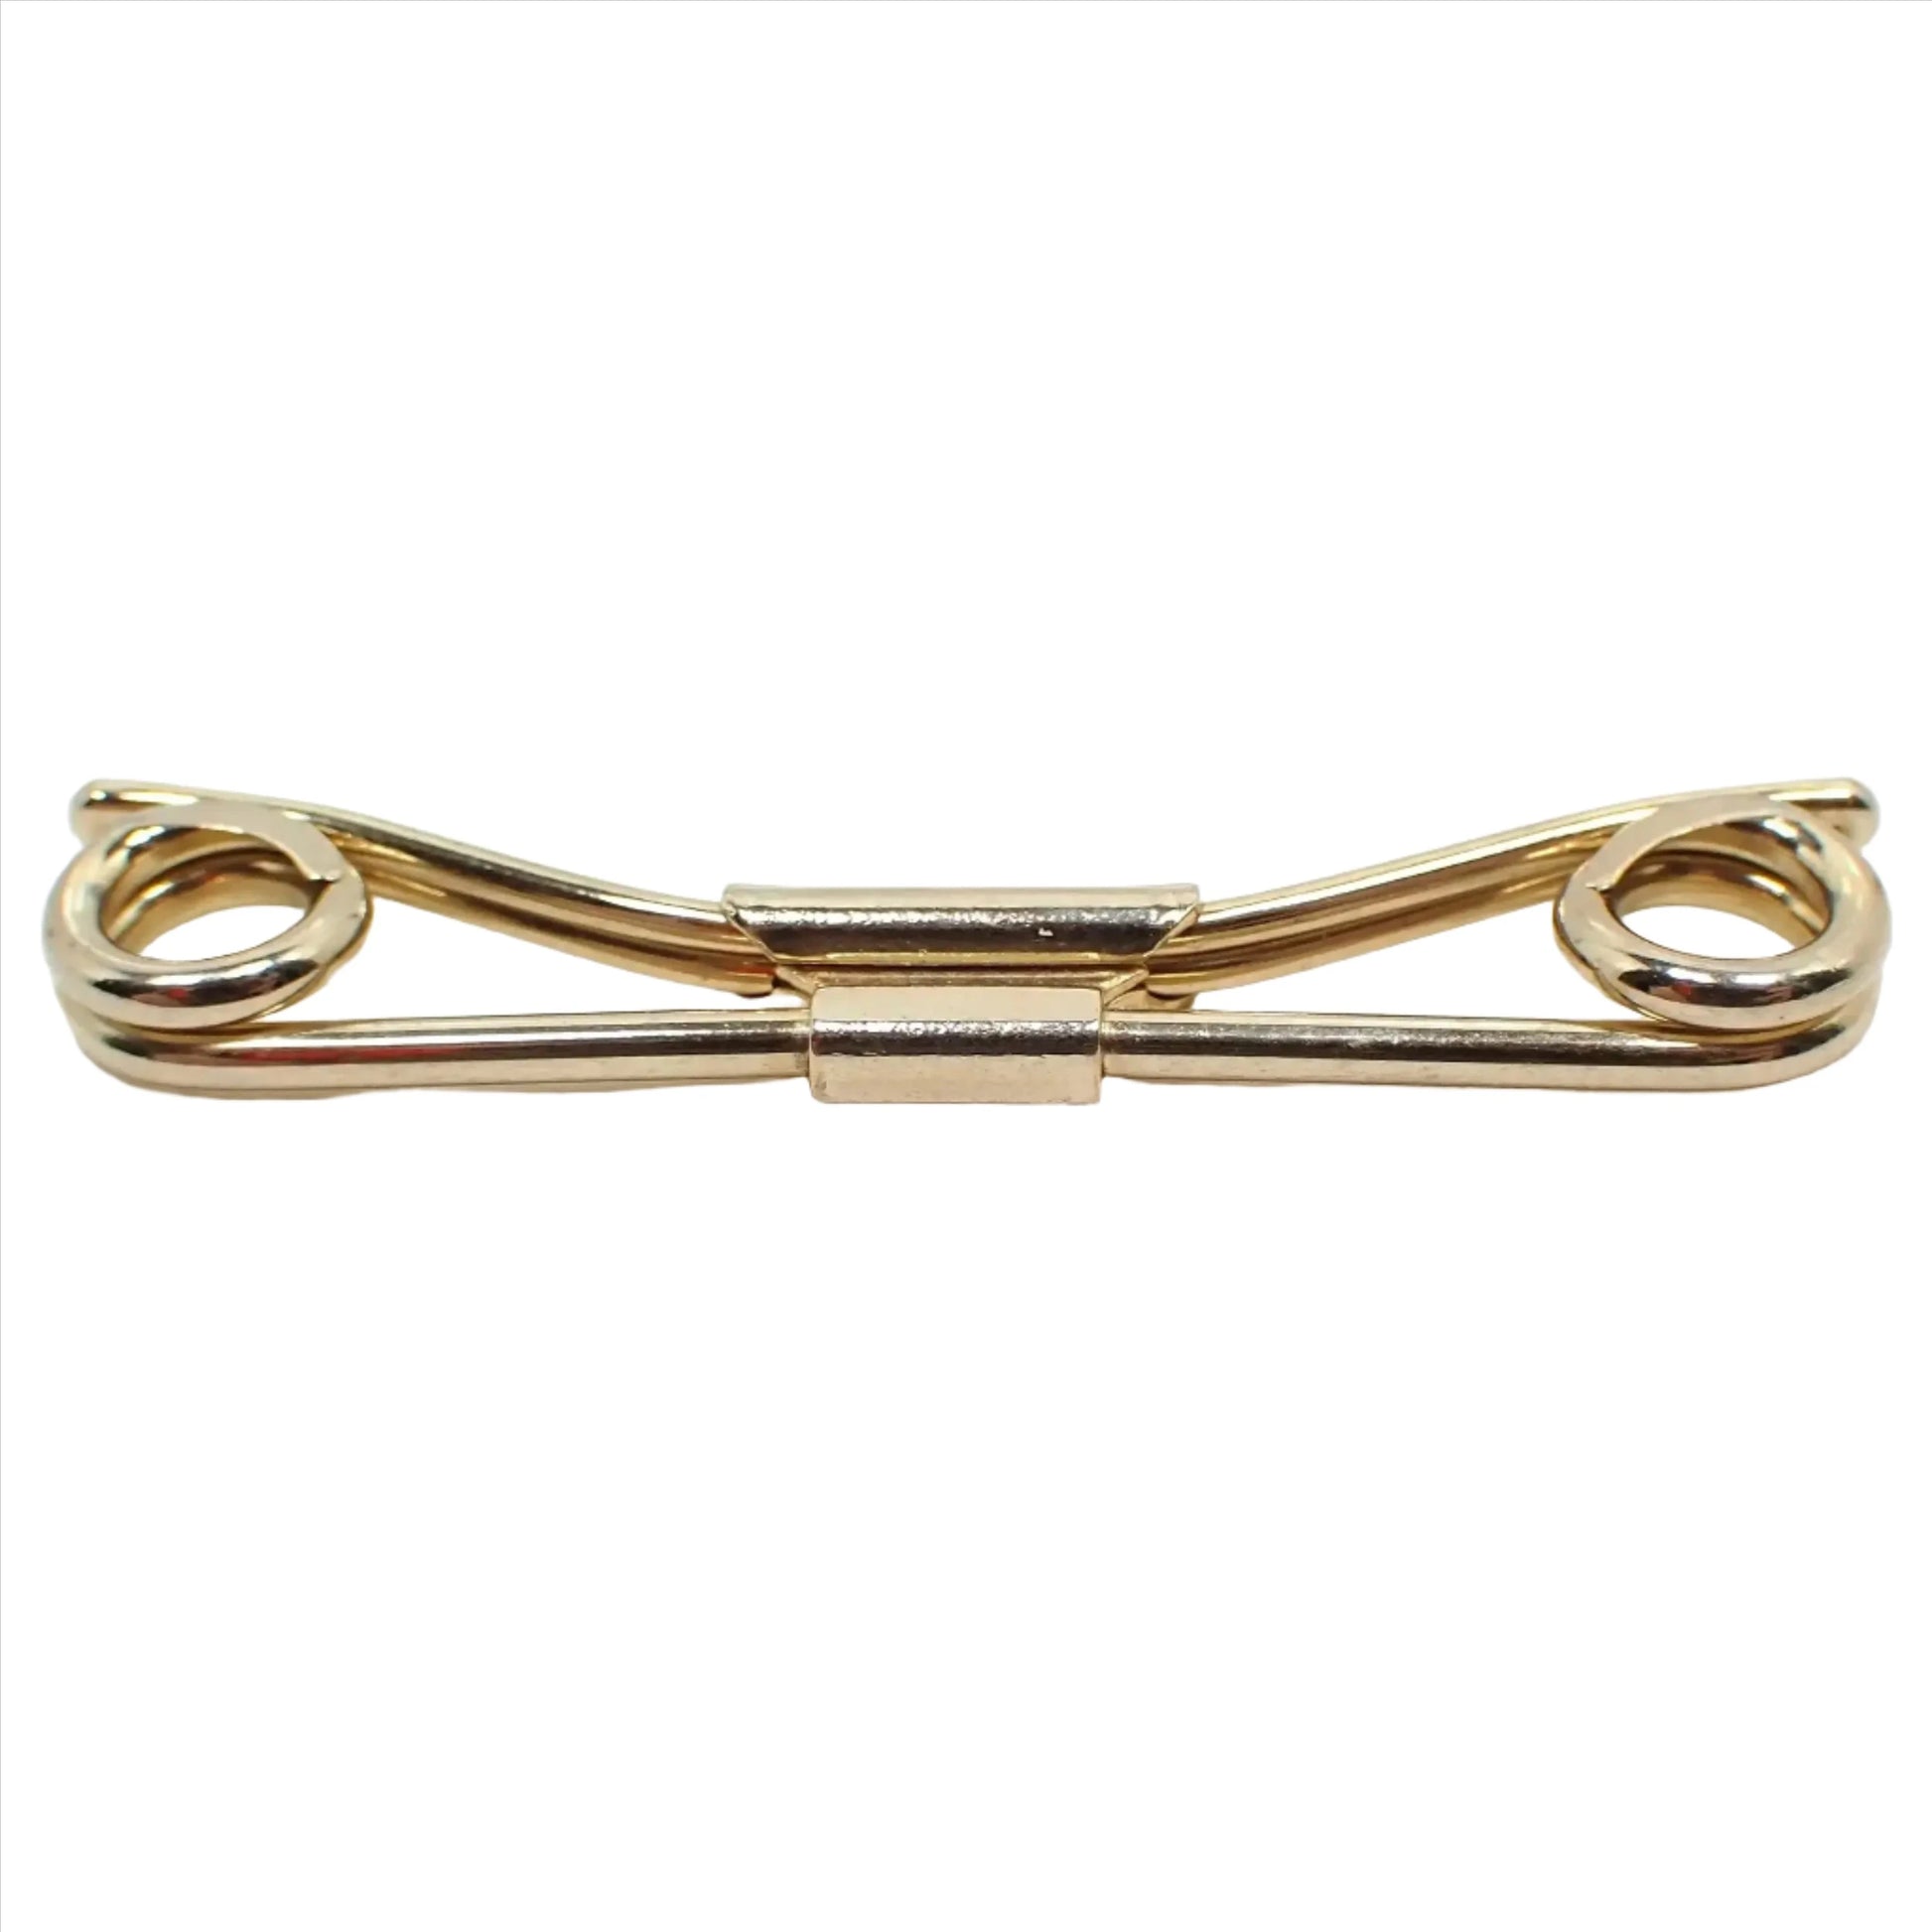 Enlarged front view of the Mid Century vintage Swank collar clip. It is gold tone plated in color. The front has a rounded bar that has spiral ends on each side. The back has a curved design with two thinner rounded bars together.